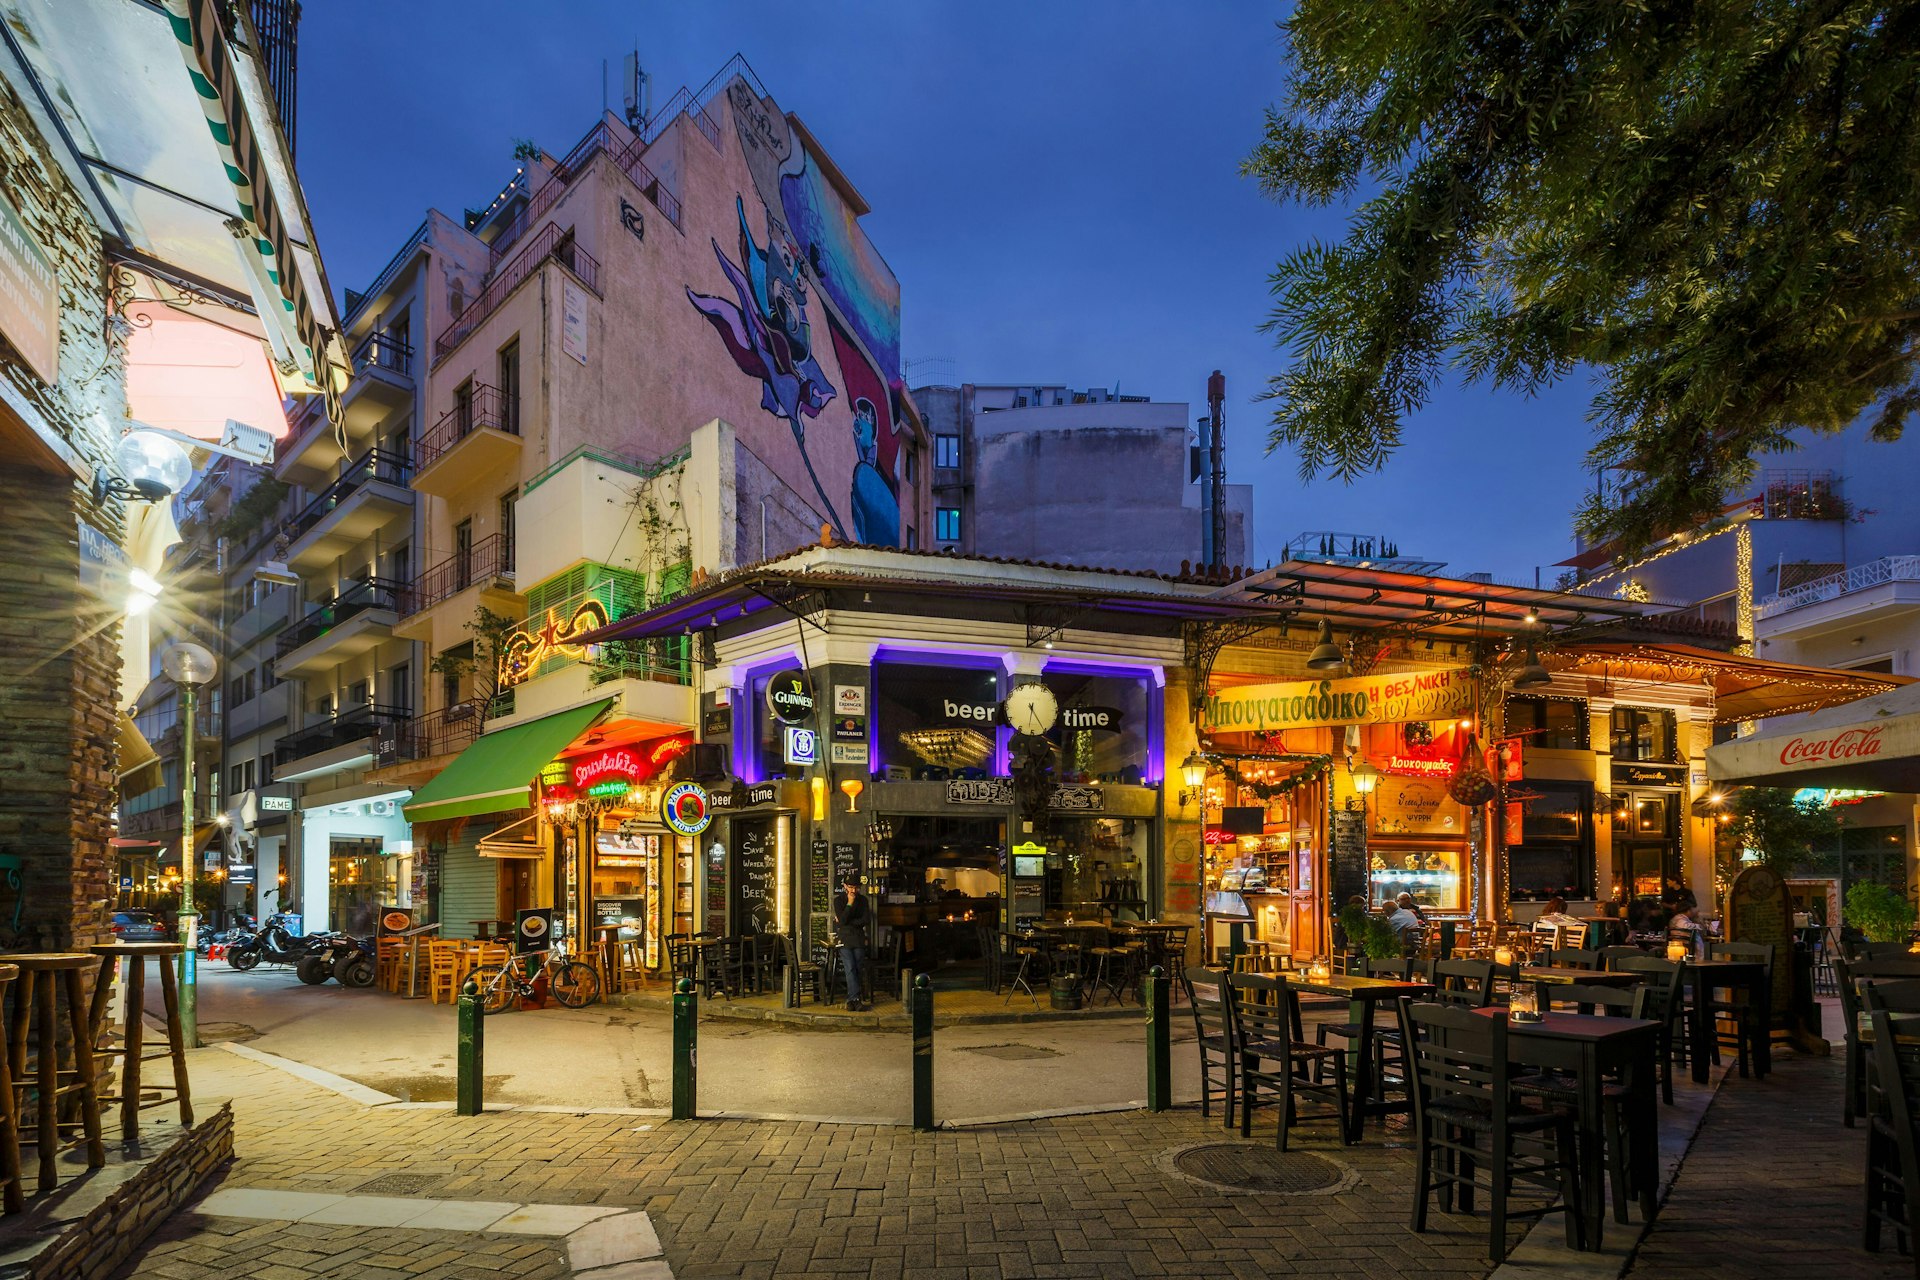 Bars and coffee shops in Psirri neighbourhood in central Athens, Greece.